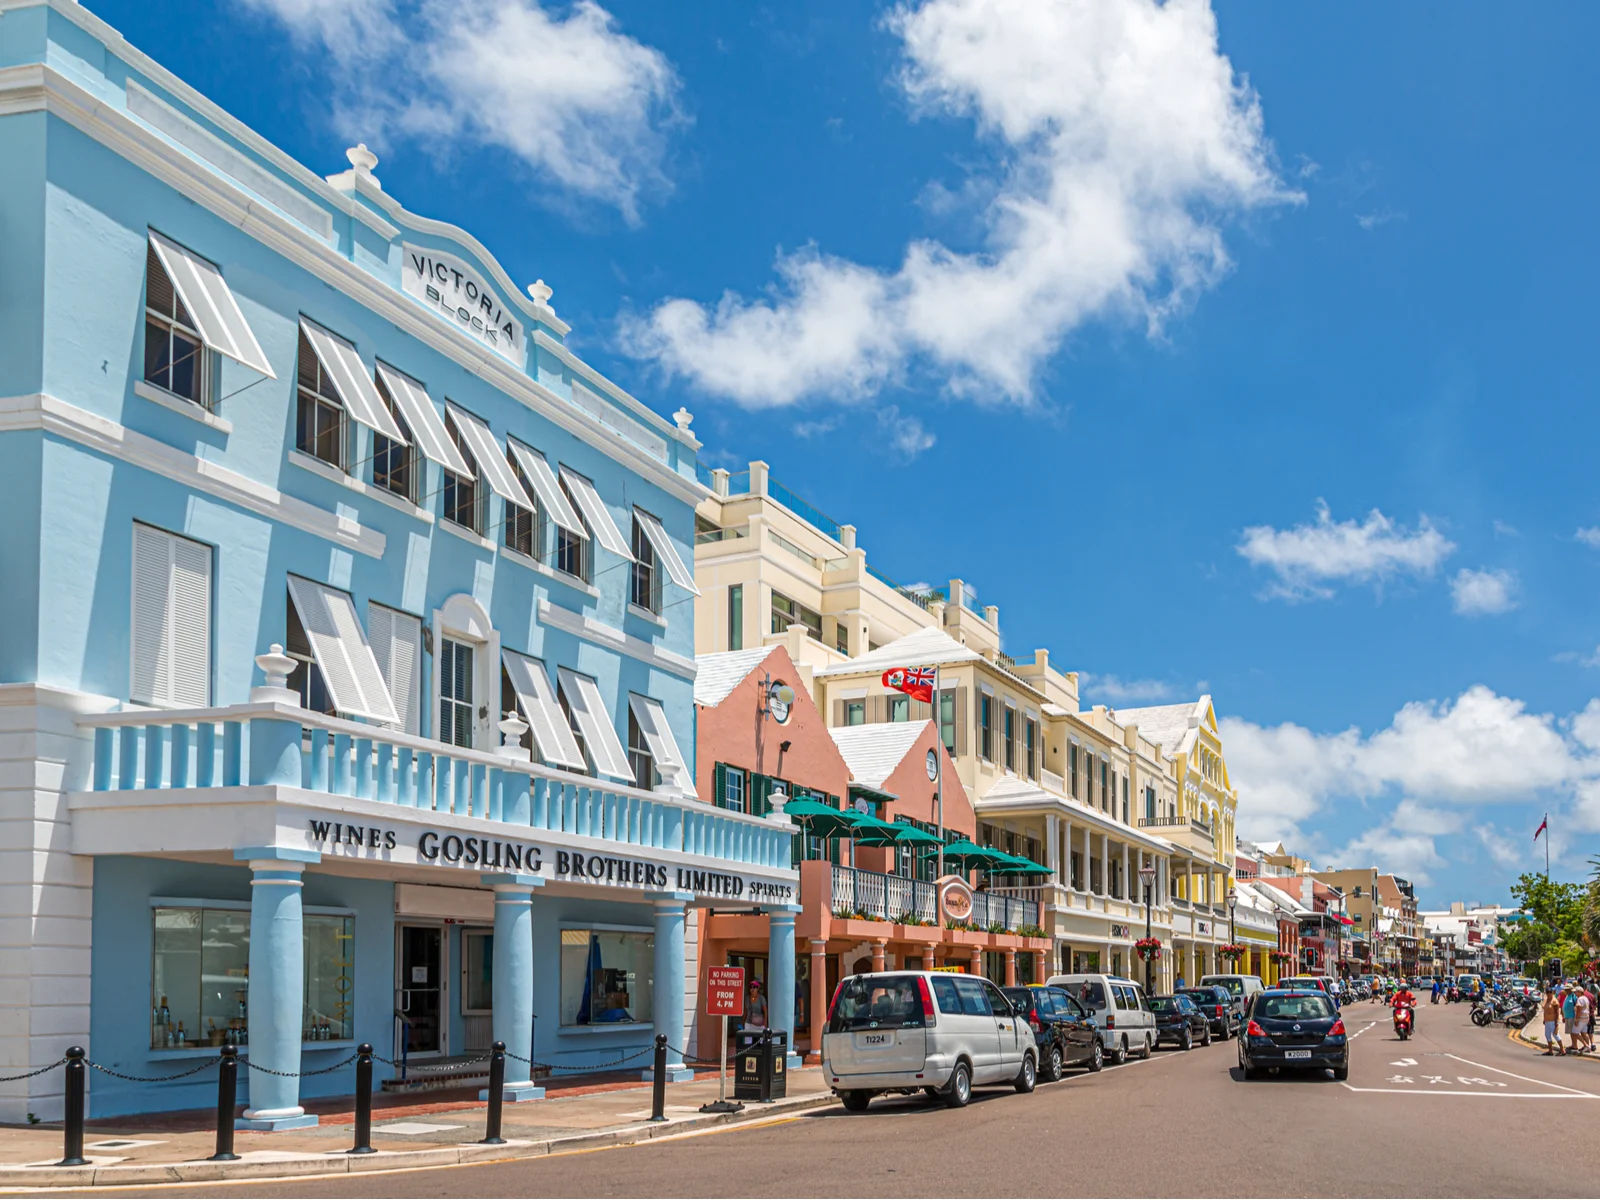 Hamilton, Bermuda pictured during the least busy time to go, featuring streets with little traffic